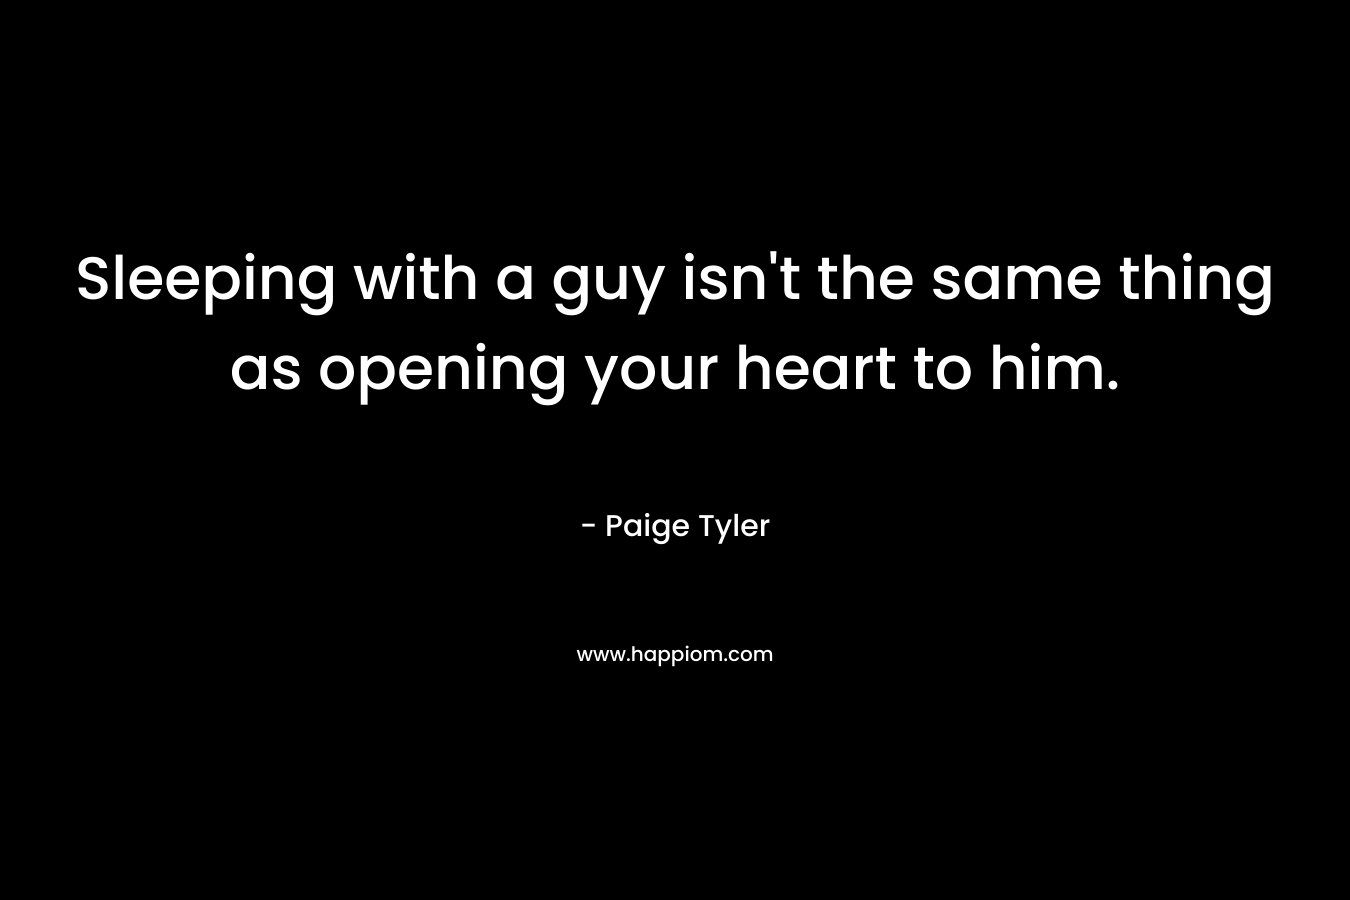 Sleeping with a guy isn’t the same thing as opening your heart to him. – Paige Tyler